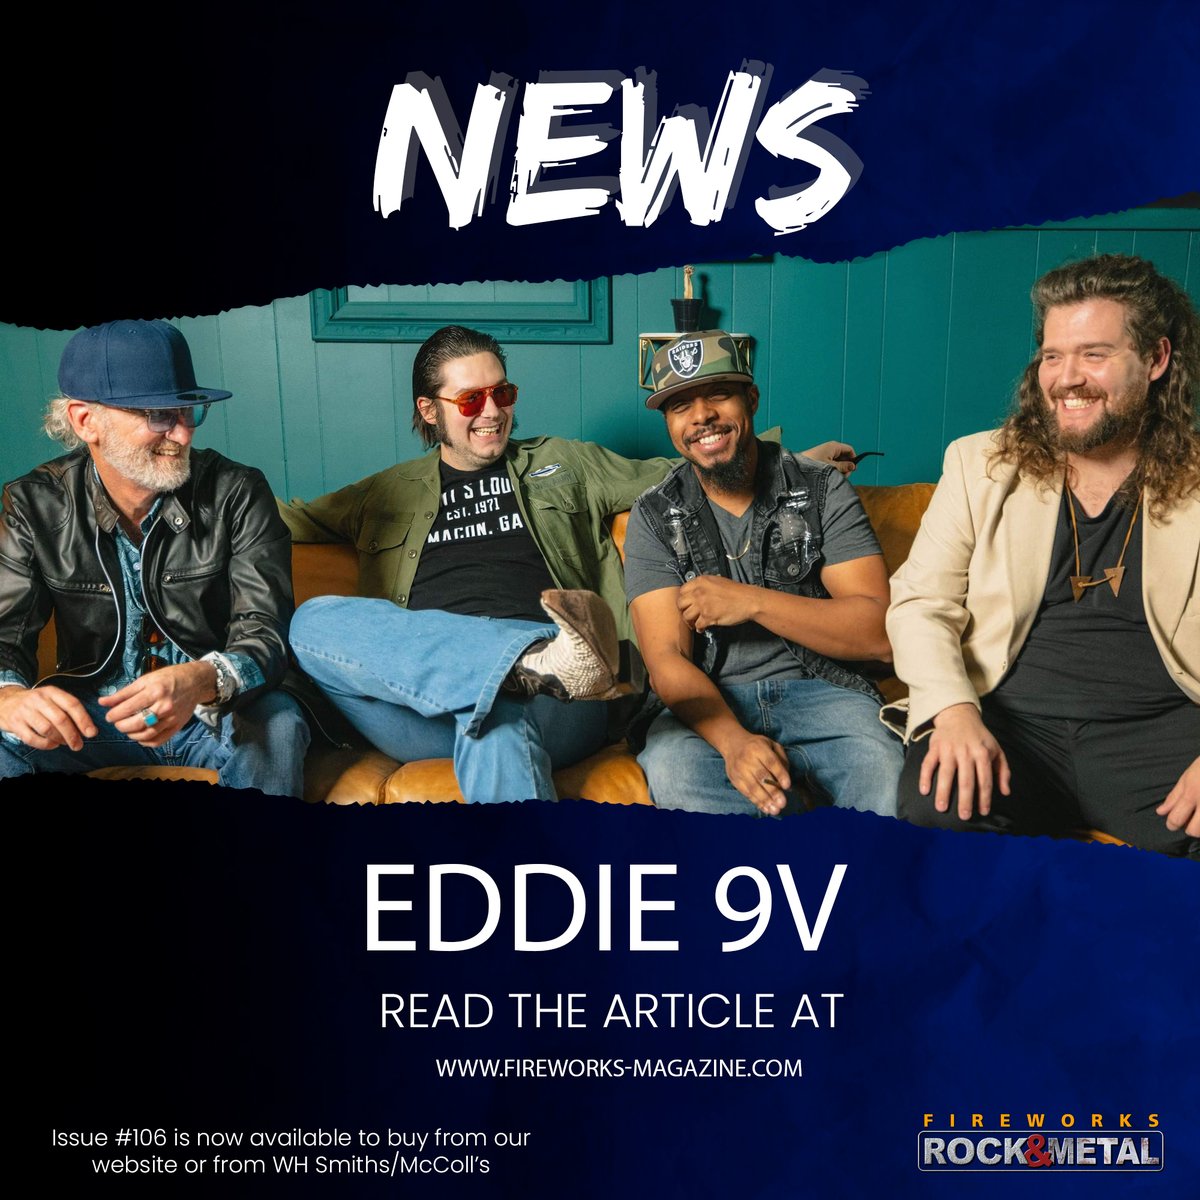 𝗘𝗫𝗖𝗘𝗟𝗟𝗘𝗡𝗧! Eddie 9V releases new single 'Saratoga' ahead of May 2024 UK Tour. 𝘙𝘦𝘢𝘥 𝘢𝘣𝘰𝘶𝘵 𝘪𝘵 𝘩𝘦𝘳𝘦: wix.to/52W4mfS @eddie_9V @noble_pr -- BUY Issue #106 from fireworks-magazine.com 𝙐𝙆 𝙎𝙪𝙗𝙨𝙘𝙧𝙞𝙥𝙩𝙞𝙤𝙣𝙨 𝙣𝙤𝙬 𝙟𝙪𝙨𝙩 £32.